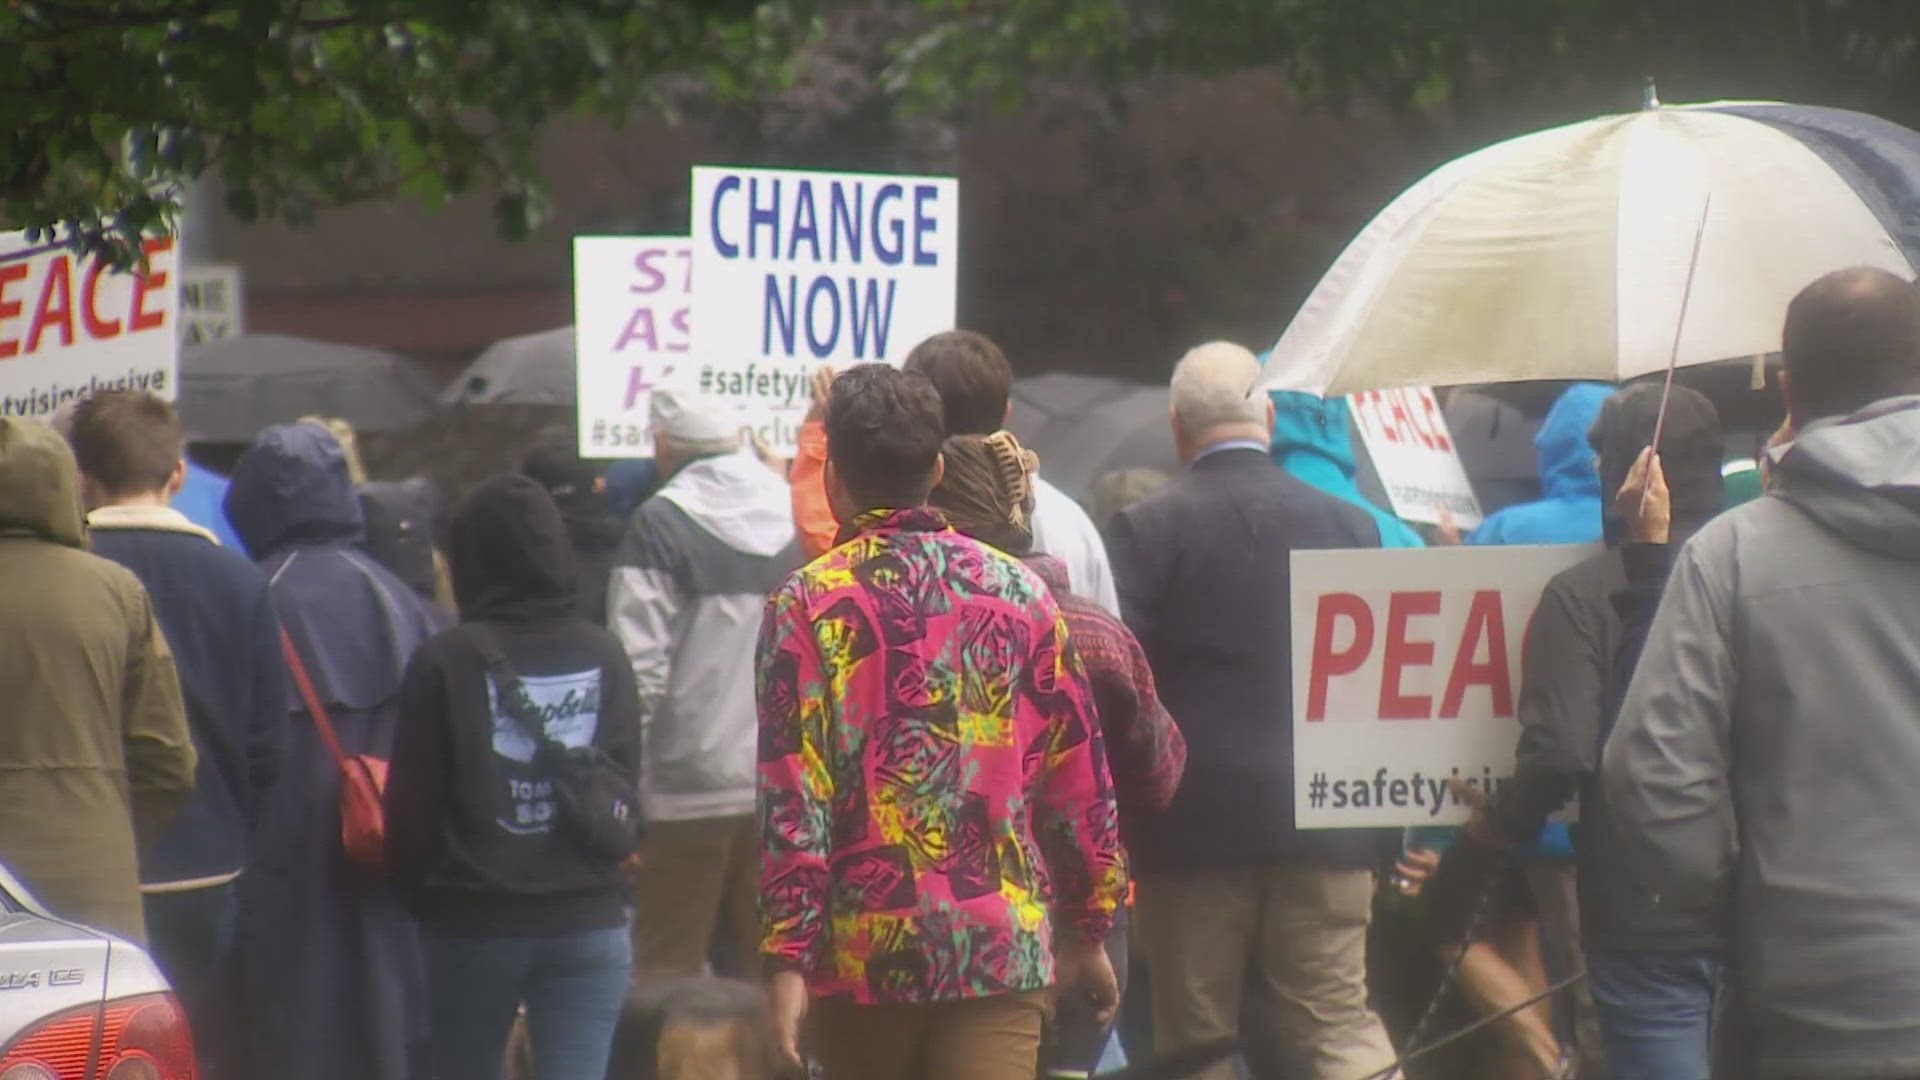 The rally was held to honor the pregnant woman who was shot and killed in an unprovoked attack in Seattle's Belltown neighborhood earlier this week.